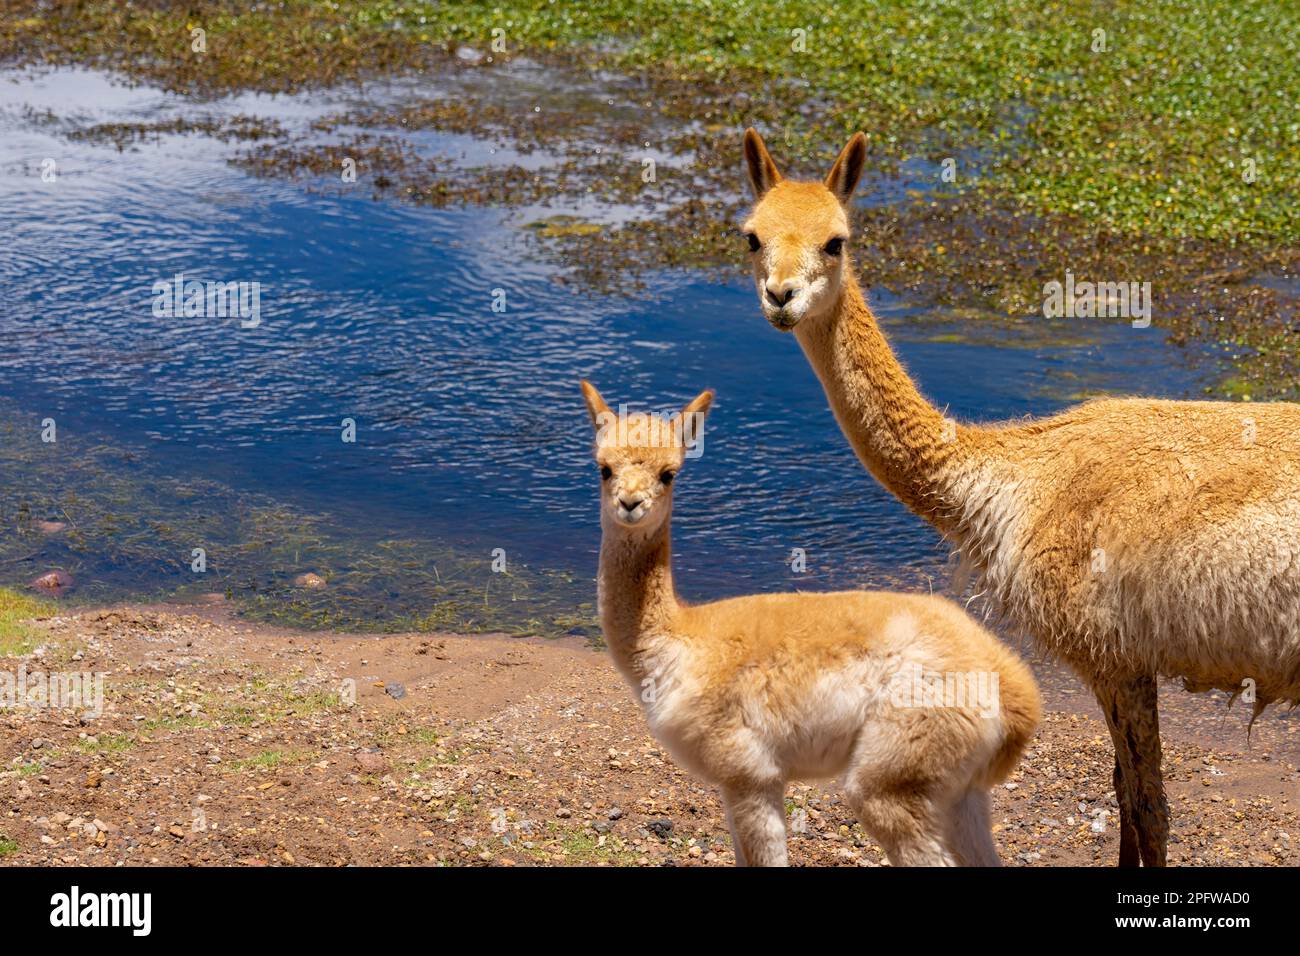 A vicuna with a baby at the edge of the water both stare directly into the camera near San Pedro de Atacama, Chile. Stock Photo